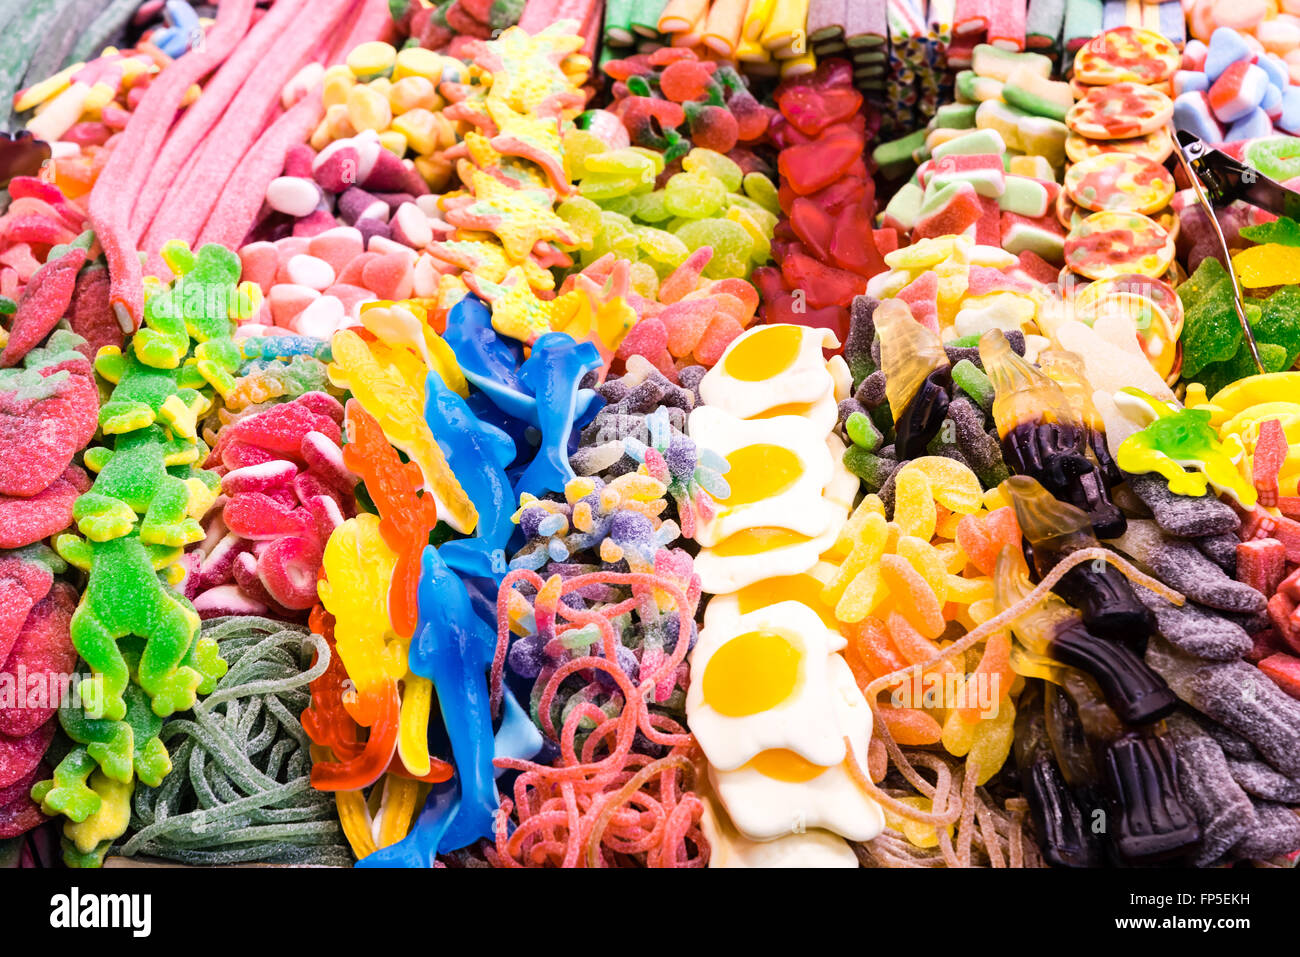 colorful sweets on display at a market Stock Photo